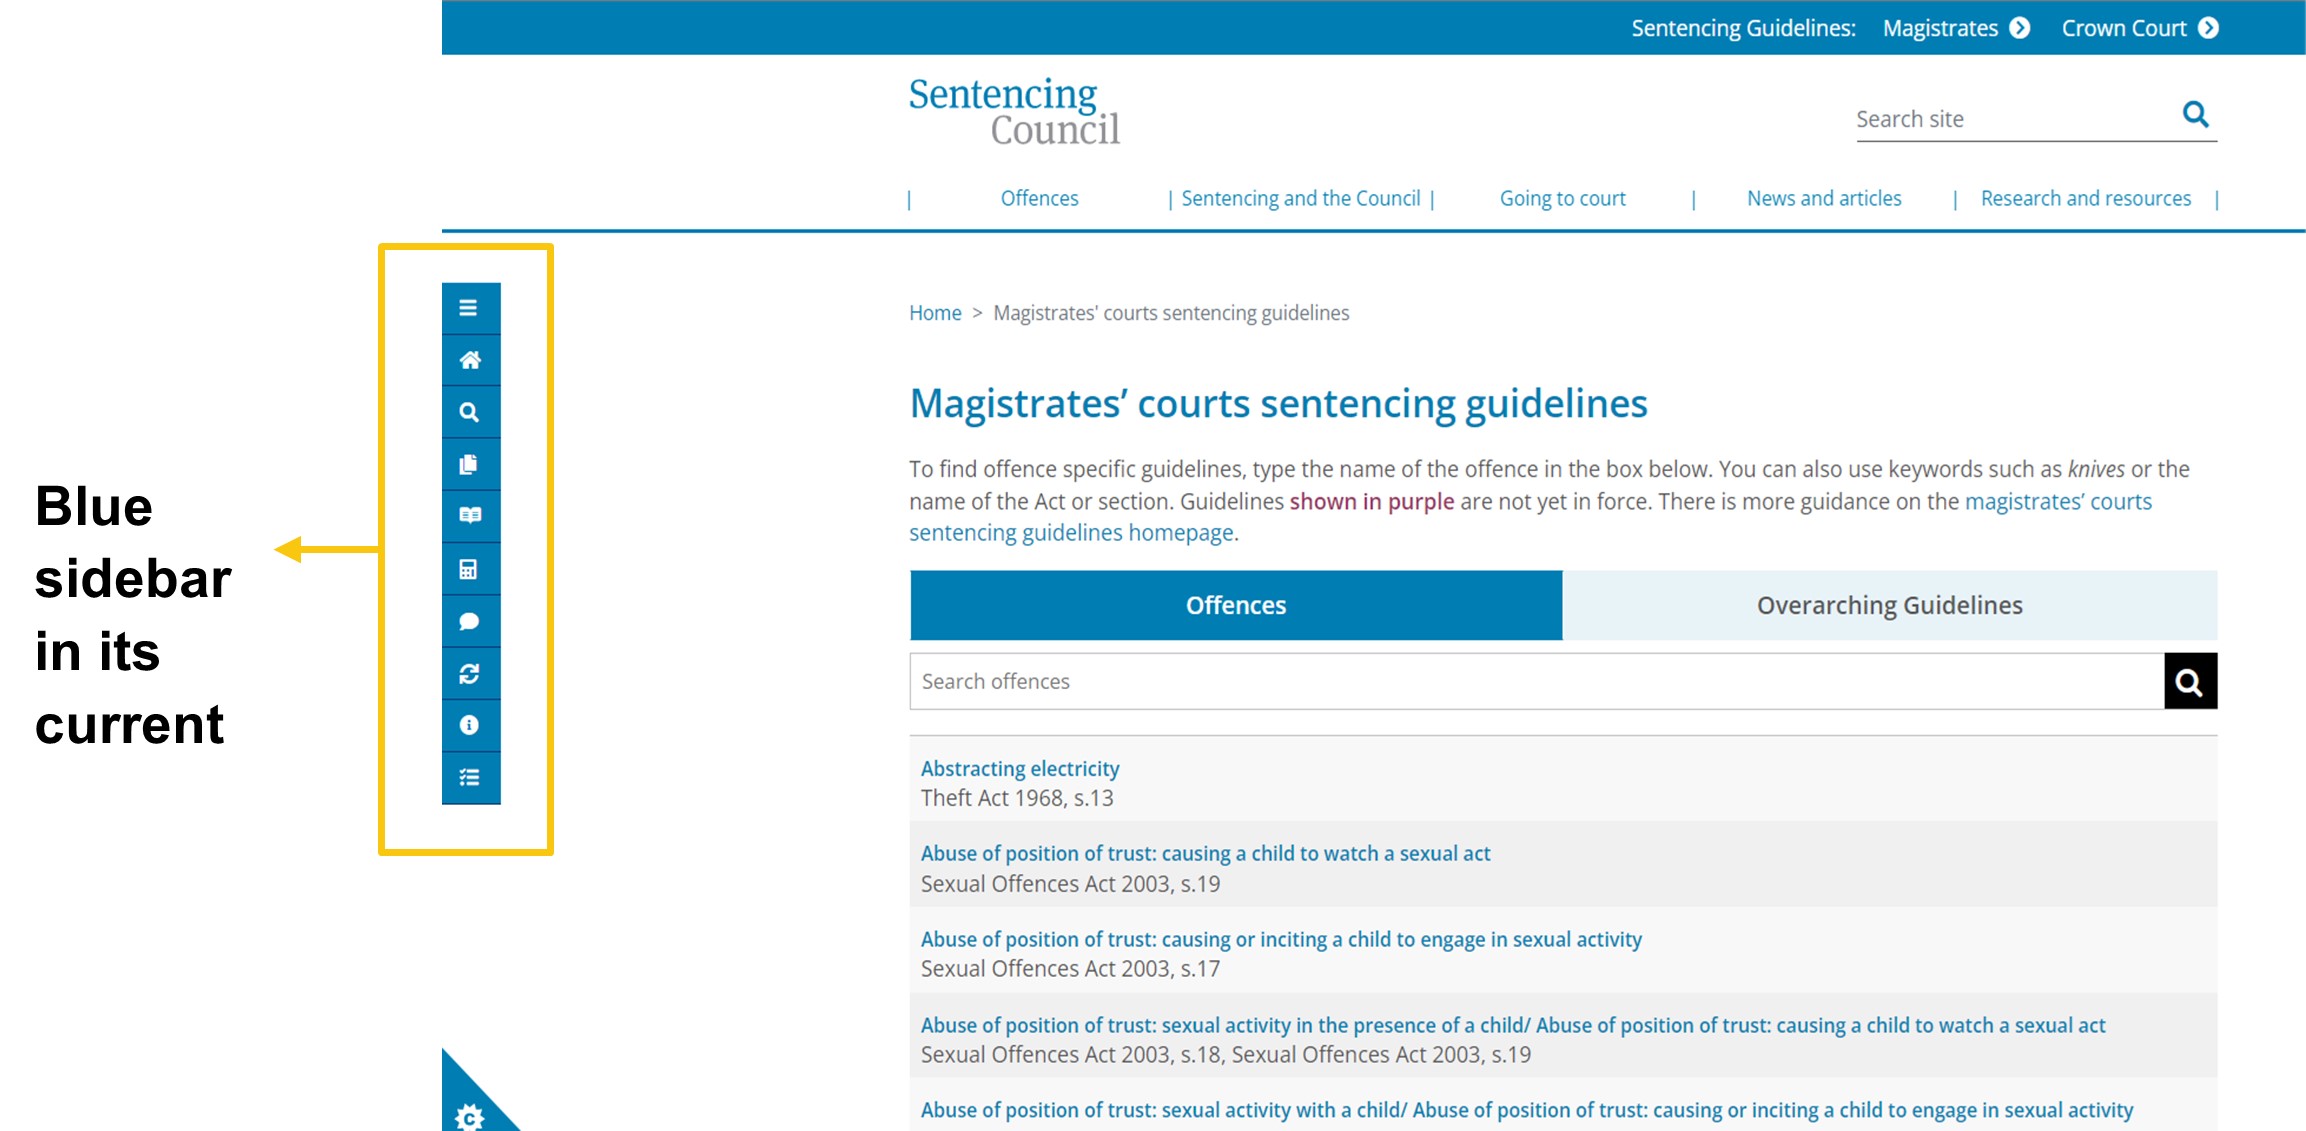 Image showing the blue sidebar on the magistrates' court guideline page.